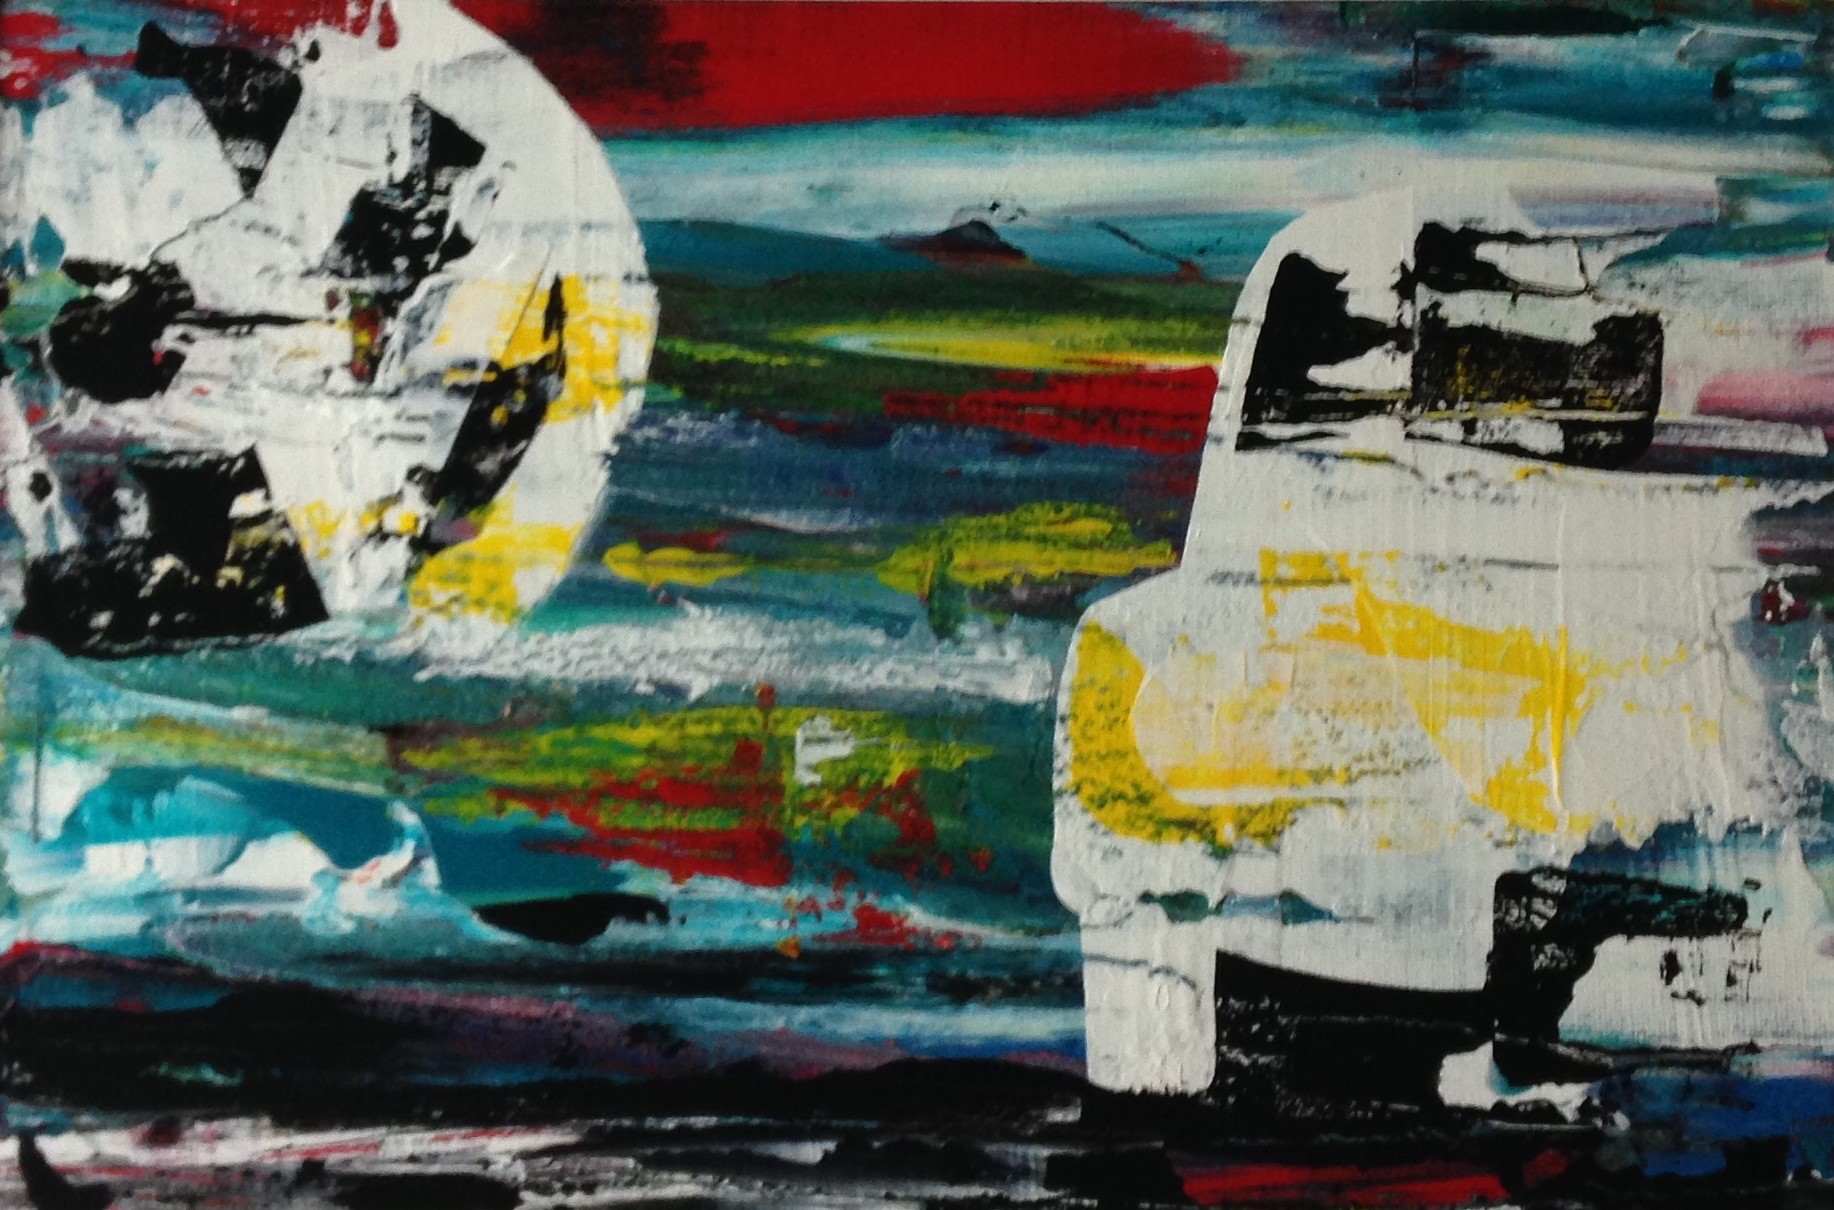 VW Beetle abstract acrylic painting by Louisa Hill